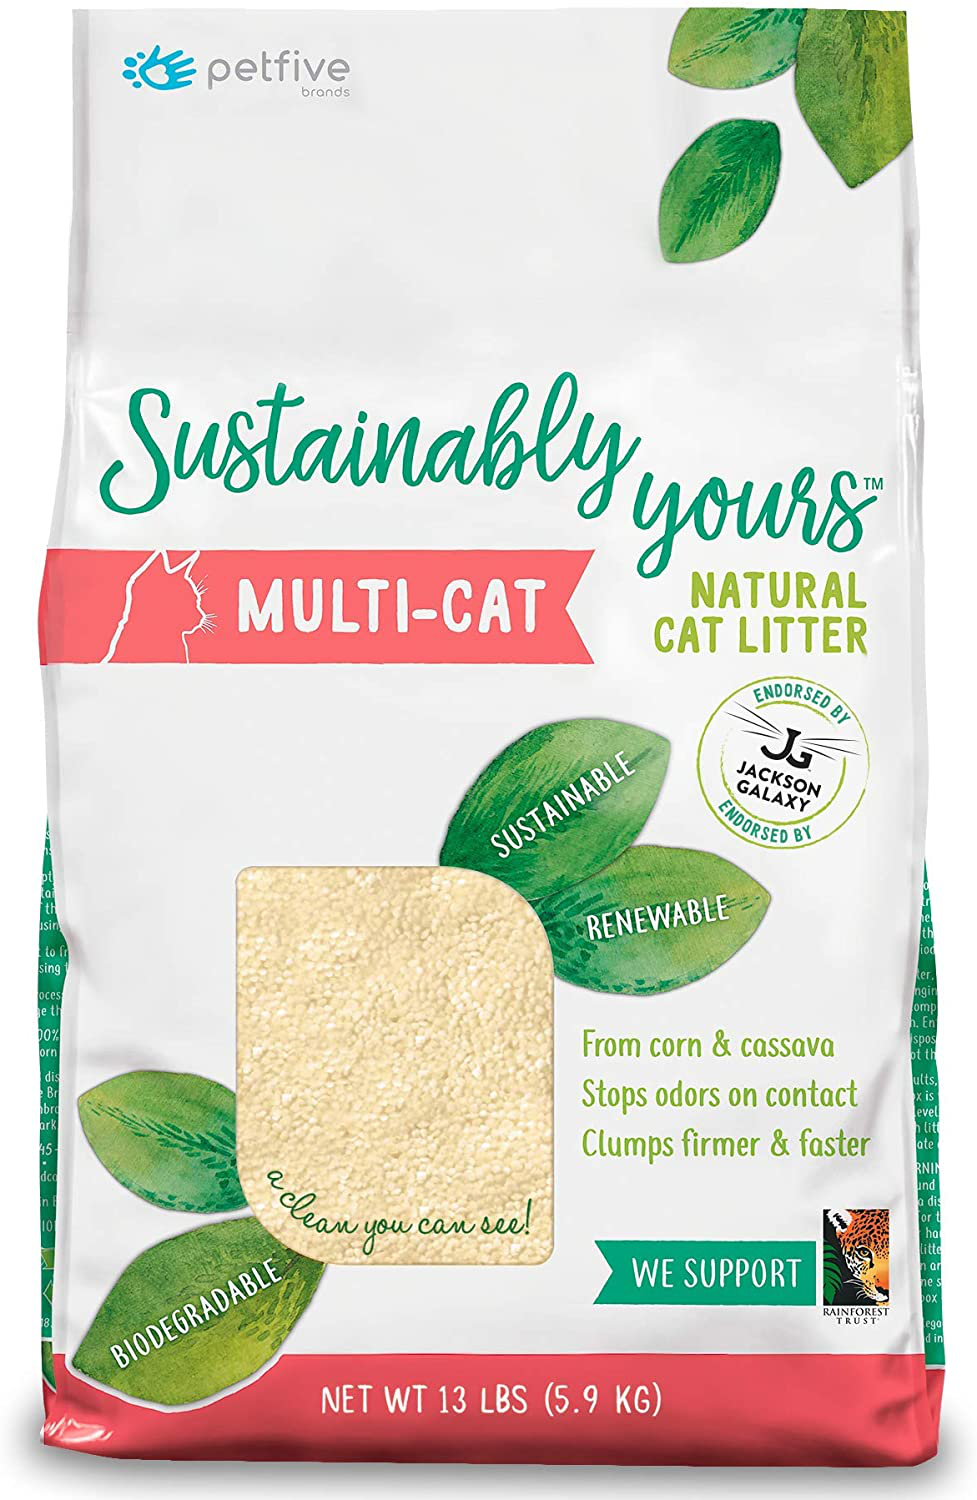 Petfive Sustainably Yours Natural Sustainable Multi-Cat Litter, 13 Lbs